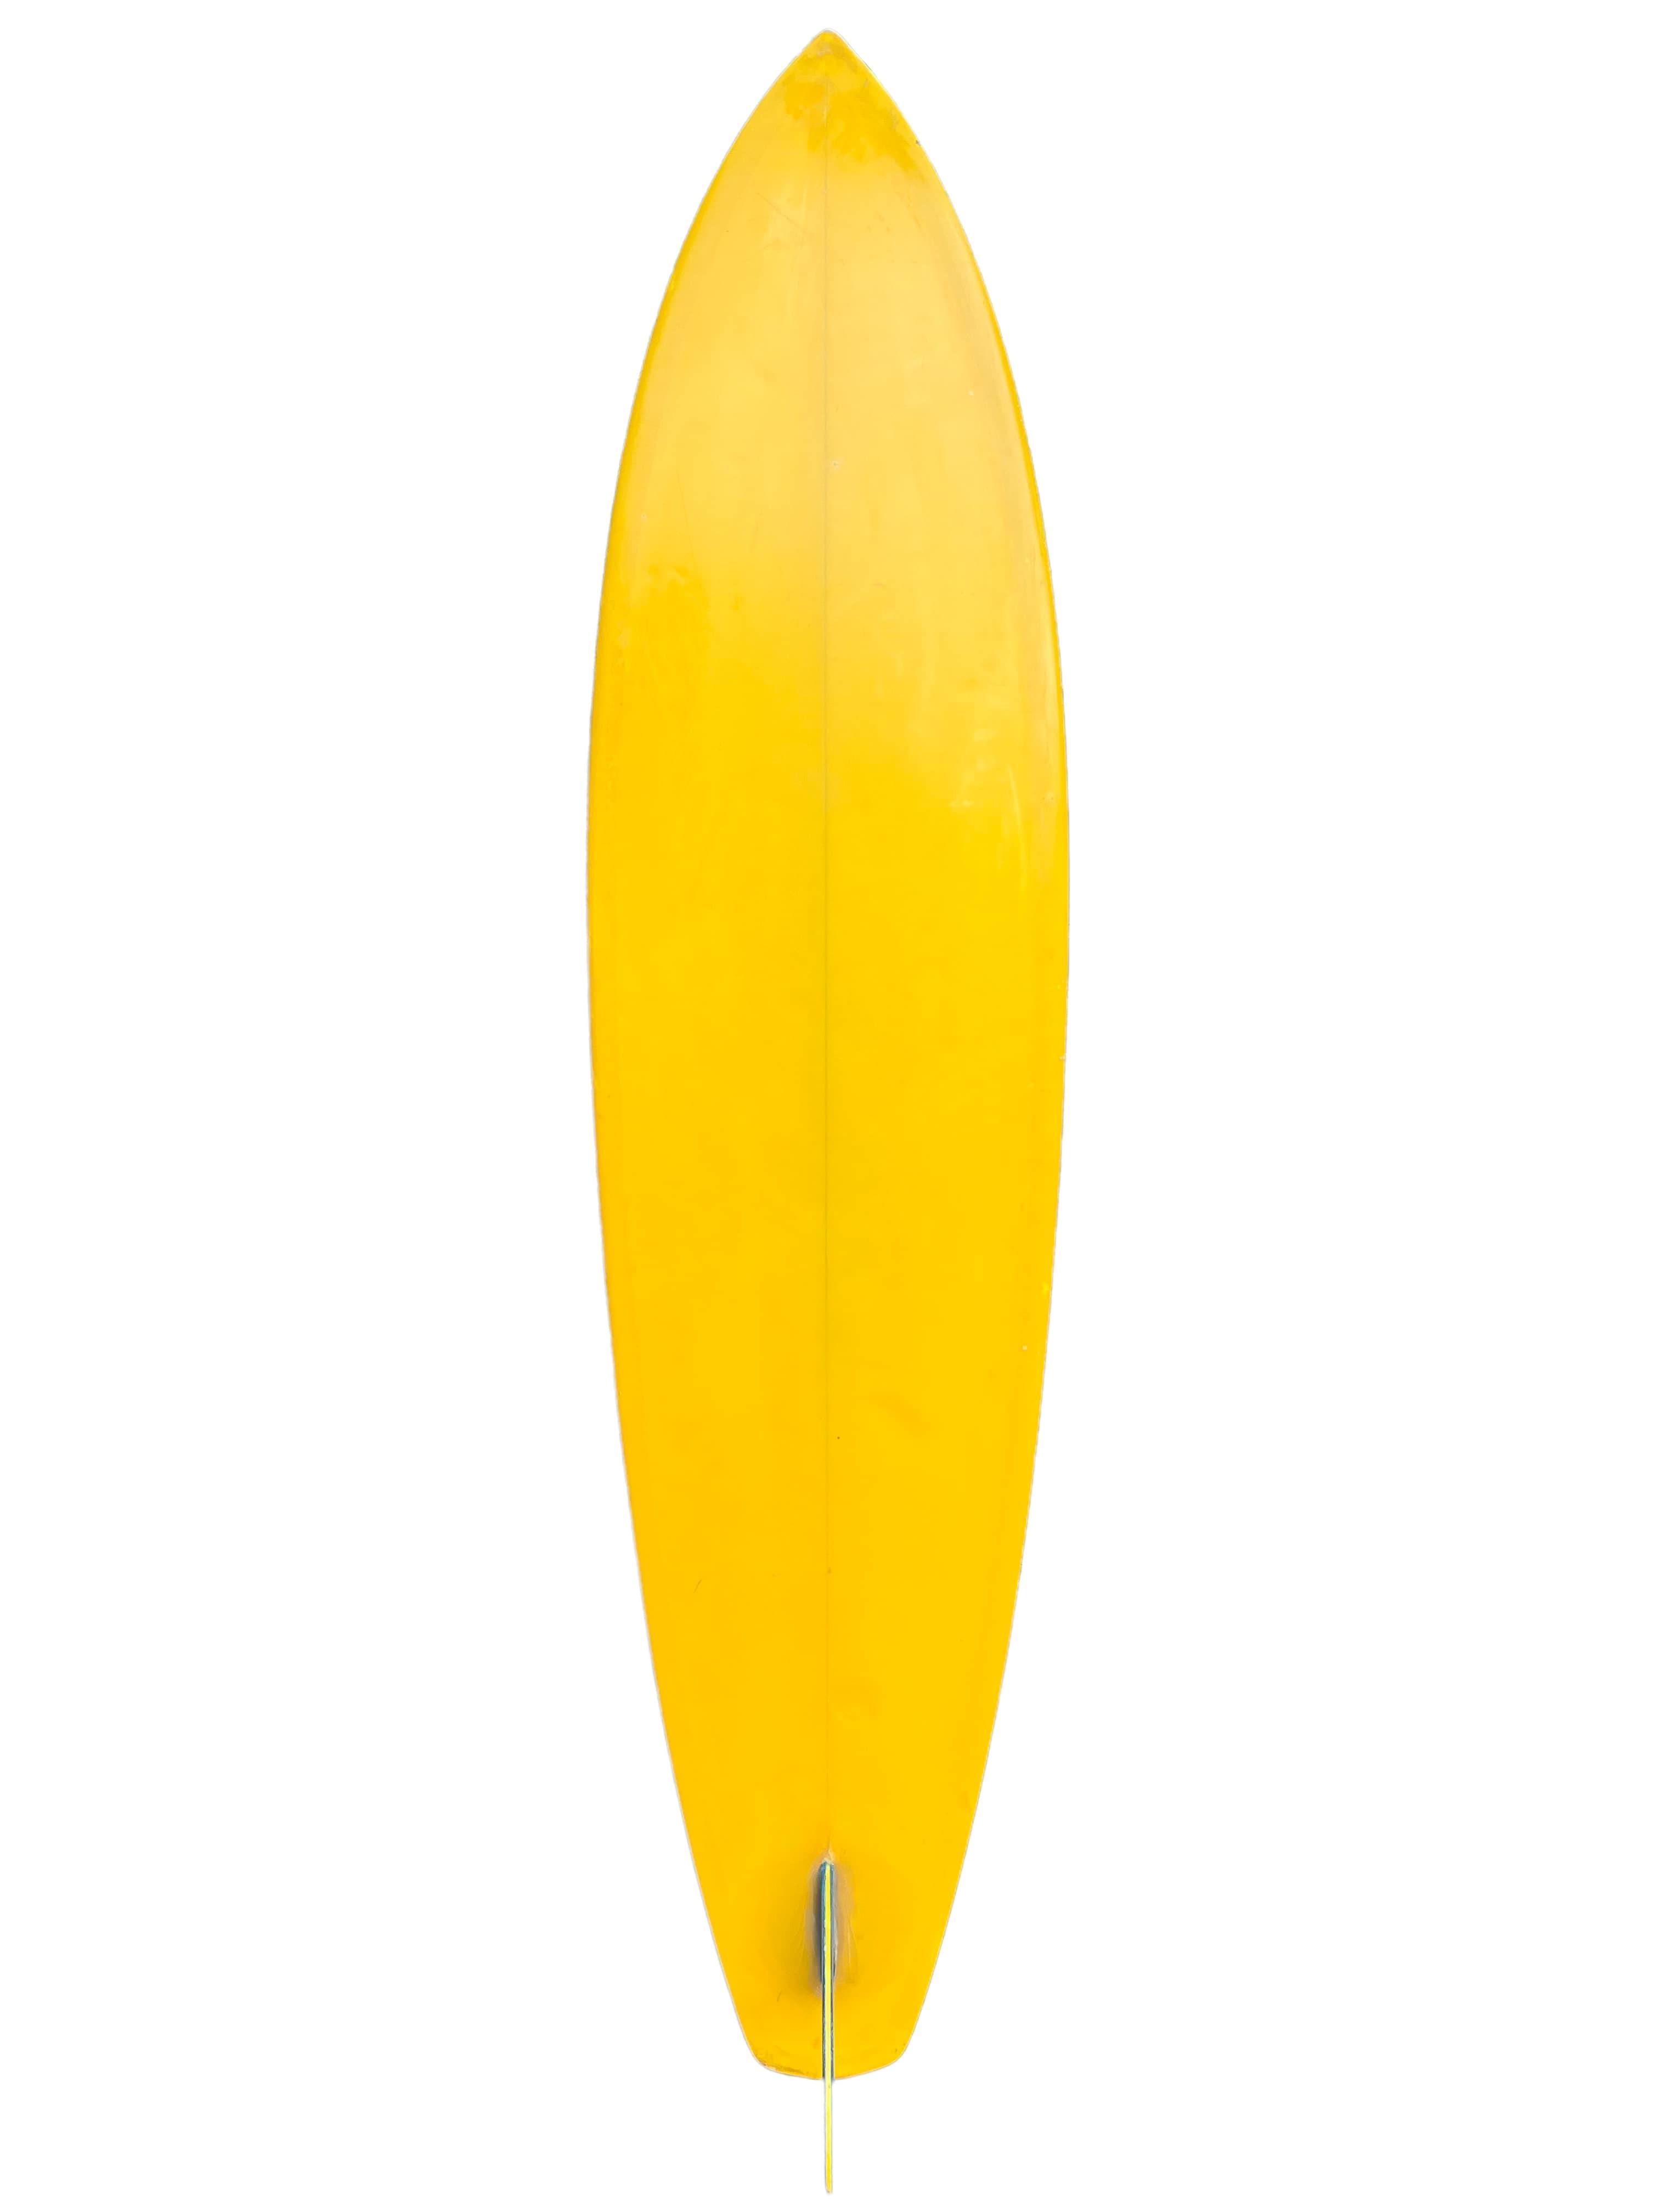 Historically Significant early Lightning Bolt surfboard hand shaped in 1972 by Gerry Lopez. Beautiful banana yellow with sky blue Lightning Bolt design complimented by a matching blue/yellow glassed on single fin. One of the earliest Lightning Bolt